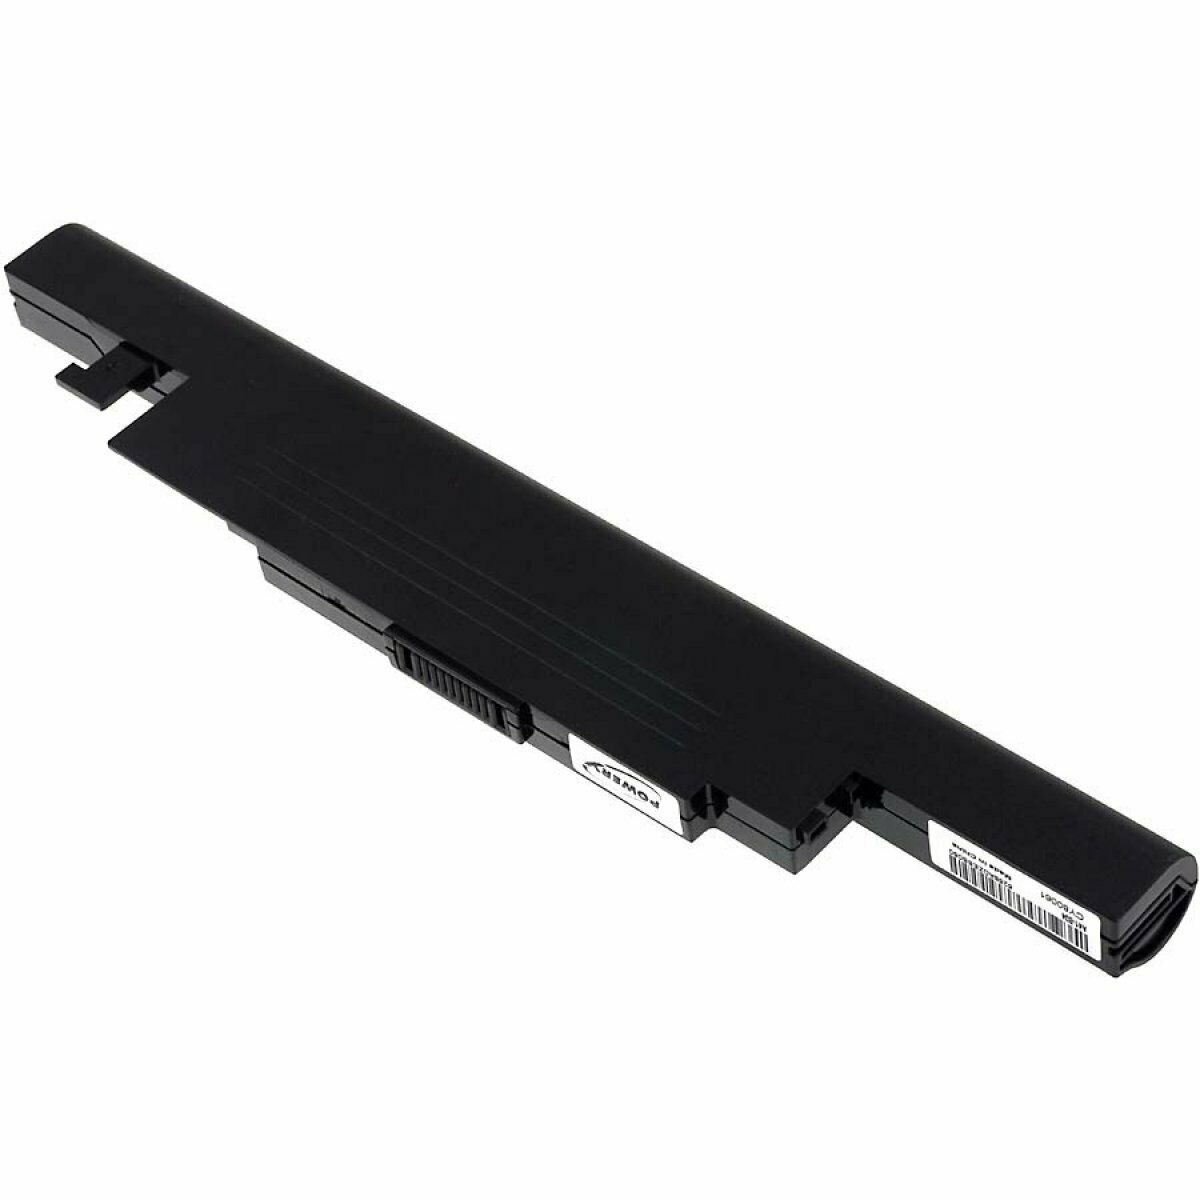 Medion Akoya S4214 S4215 S4216 S4217 S4611 S4613 A31-C15 MSN: 40040607 compatible battery